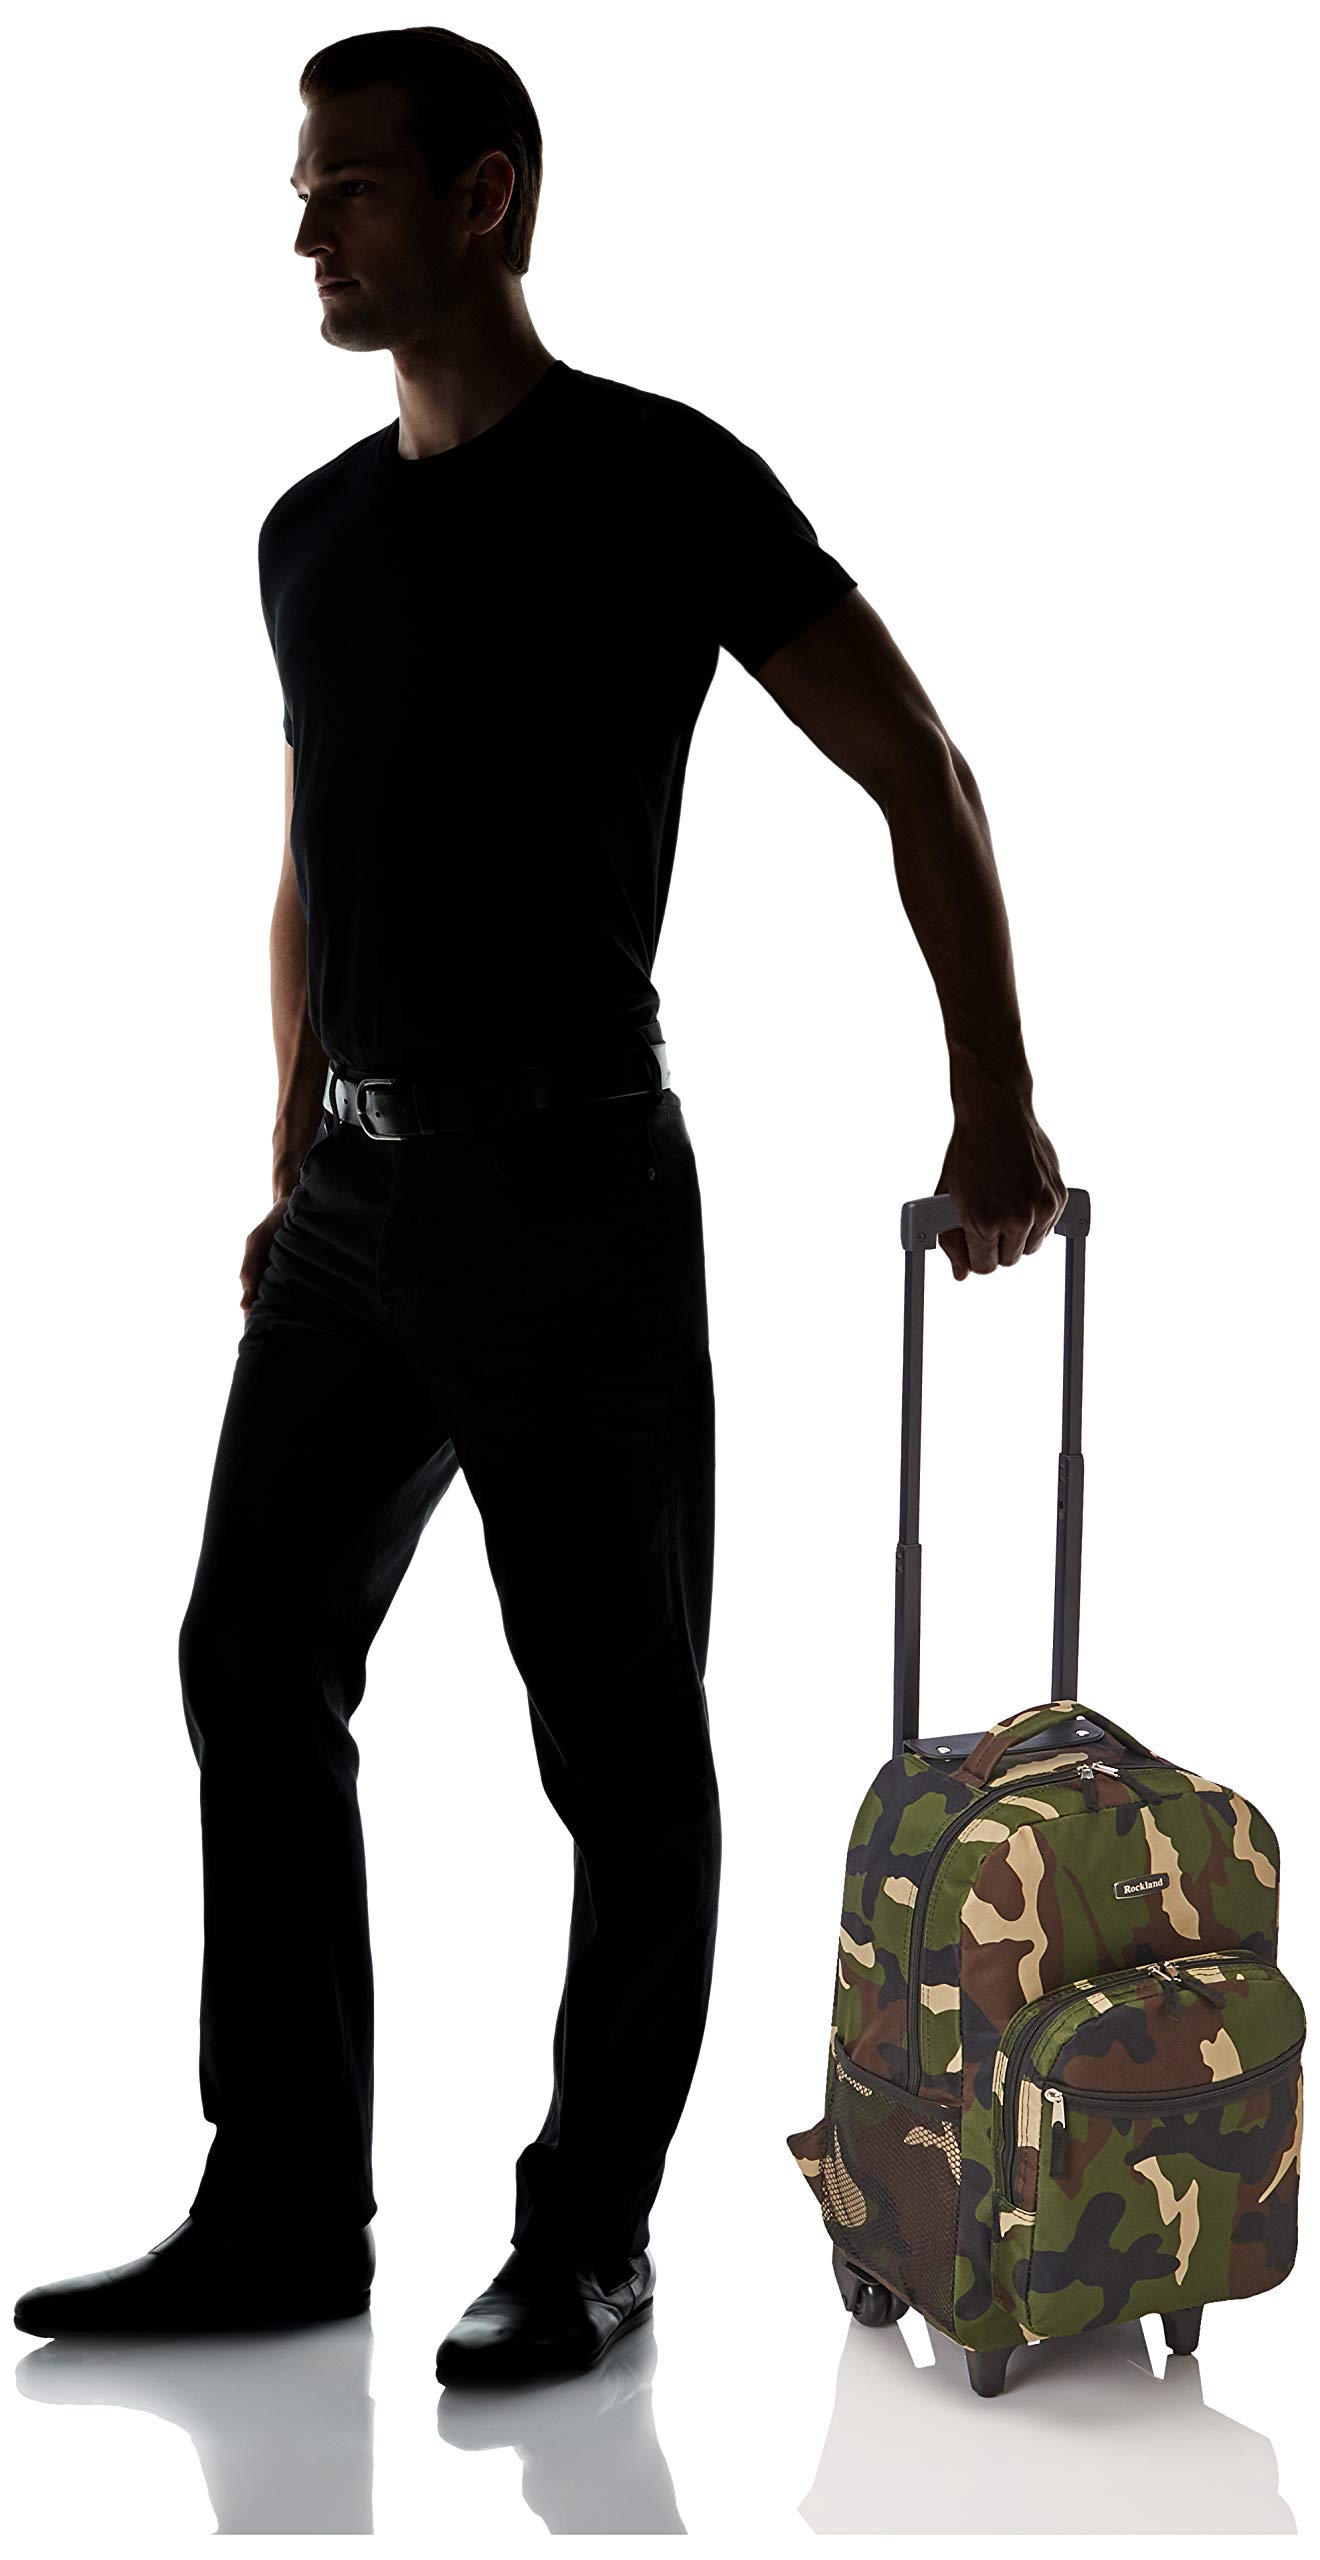 Rockland Double Handle Rolling Backpack, Camouflage, 17-Inch